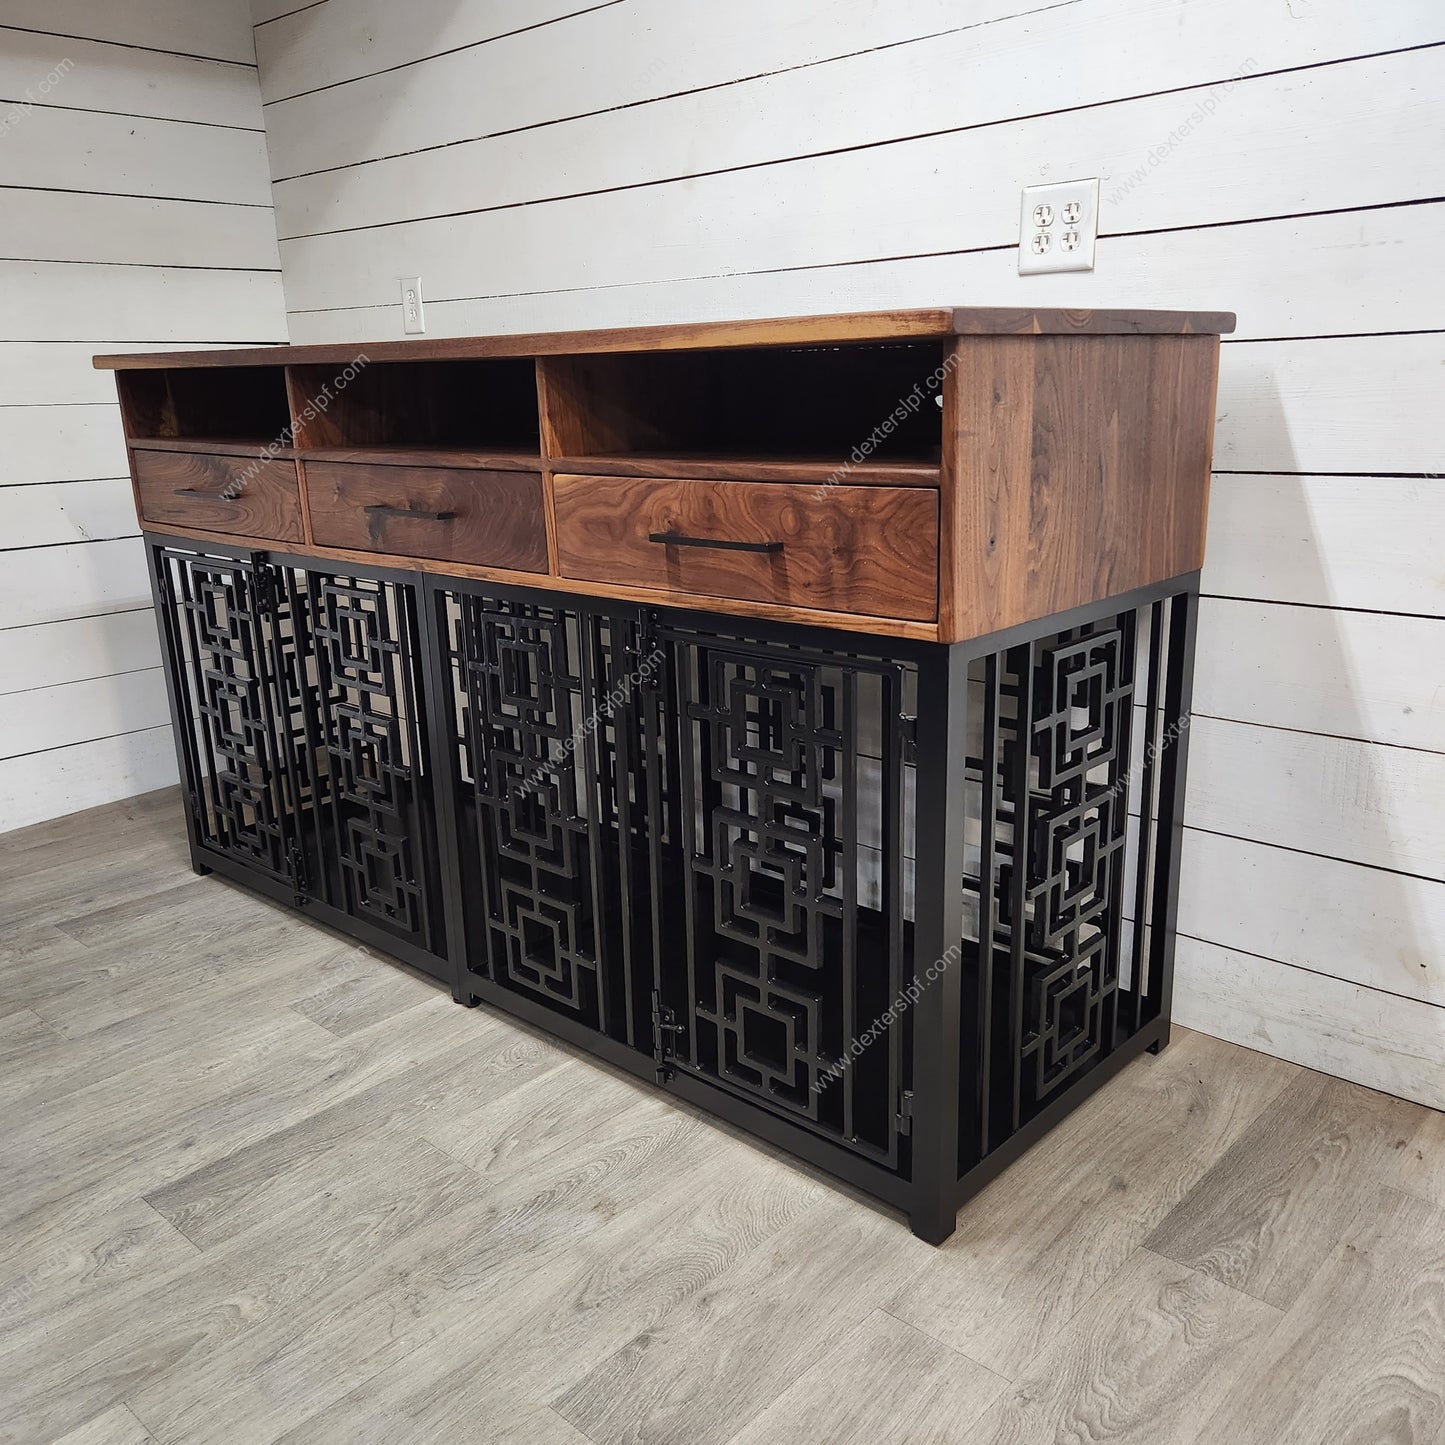 Sebby Large Double with Media Shelves & Drawers, Large Double Dog Crate, Dog Crate Furniture, Dog Kennel Furniture, Dog Crate